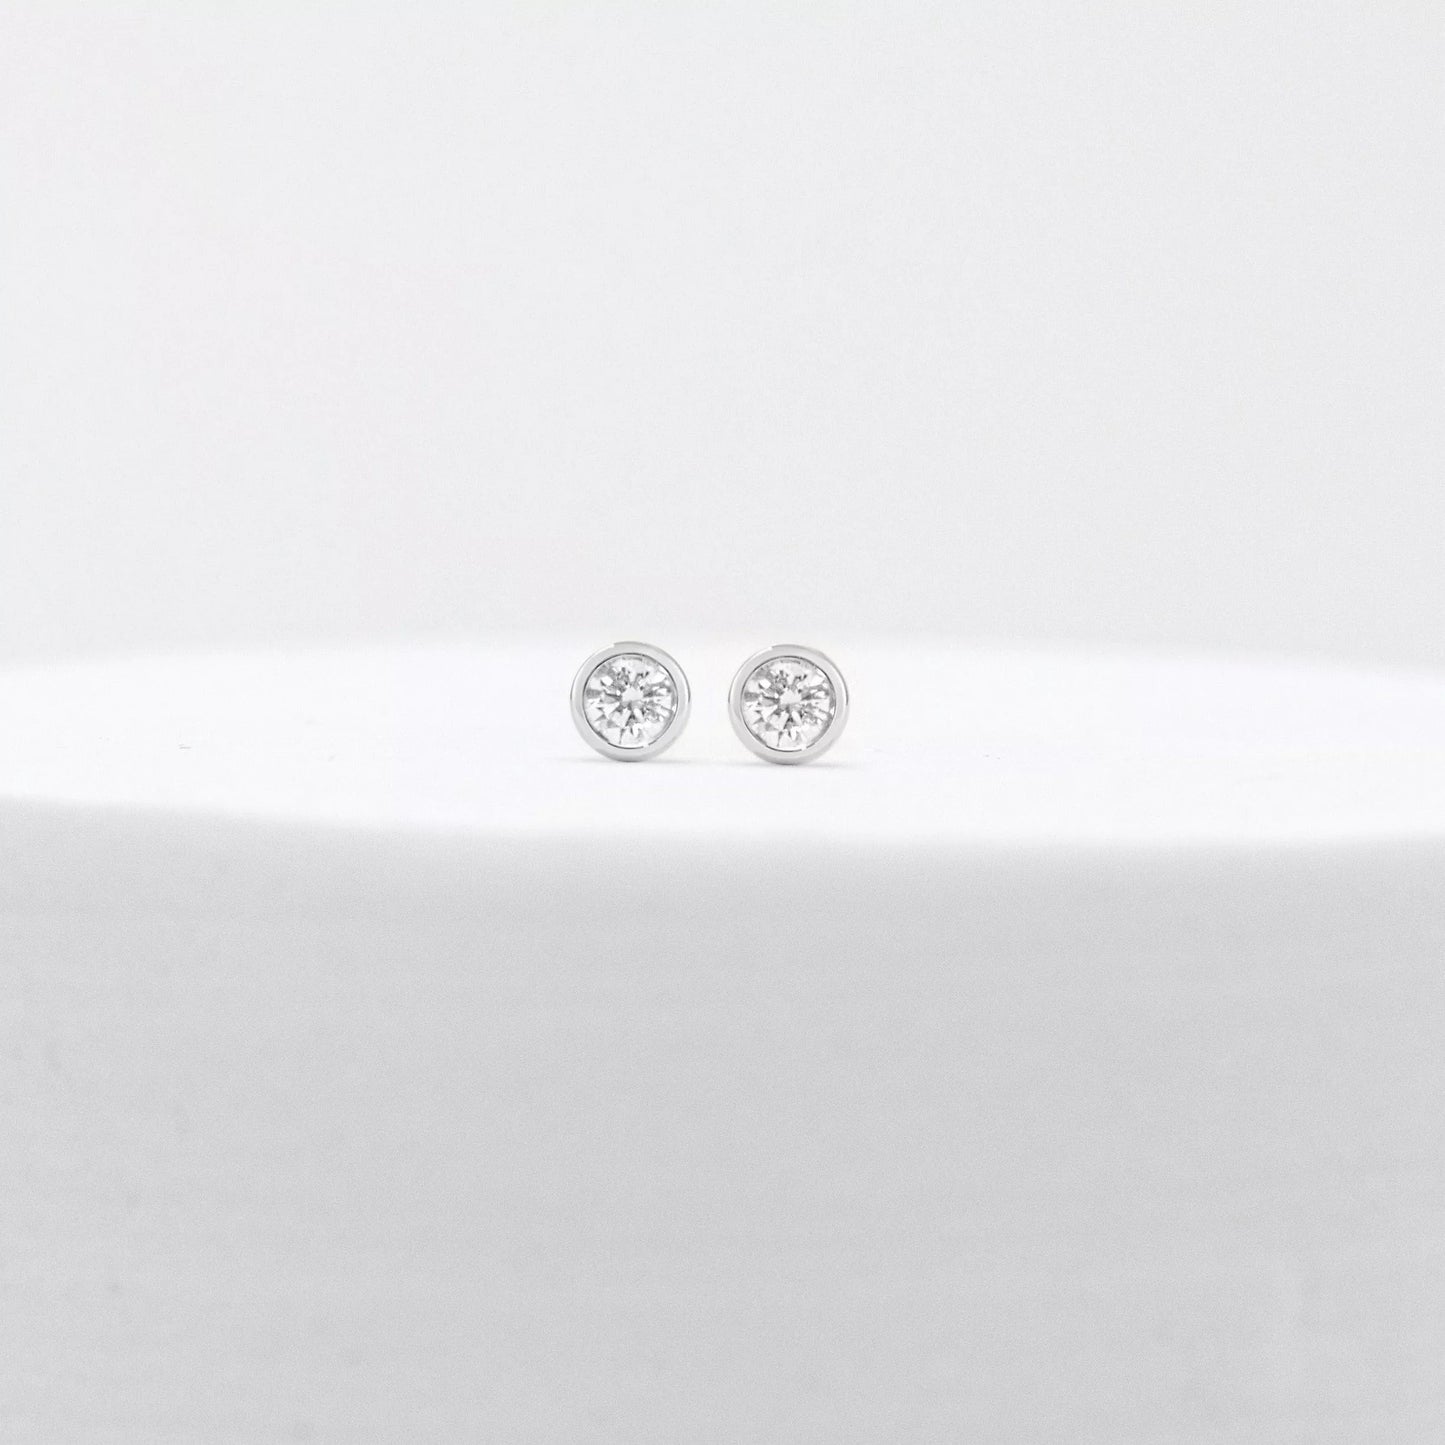 The Solitaire Bezel Studs Earrings. Recycle Gold